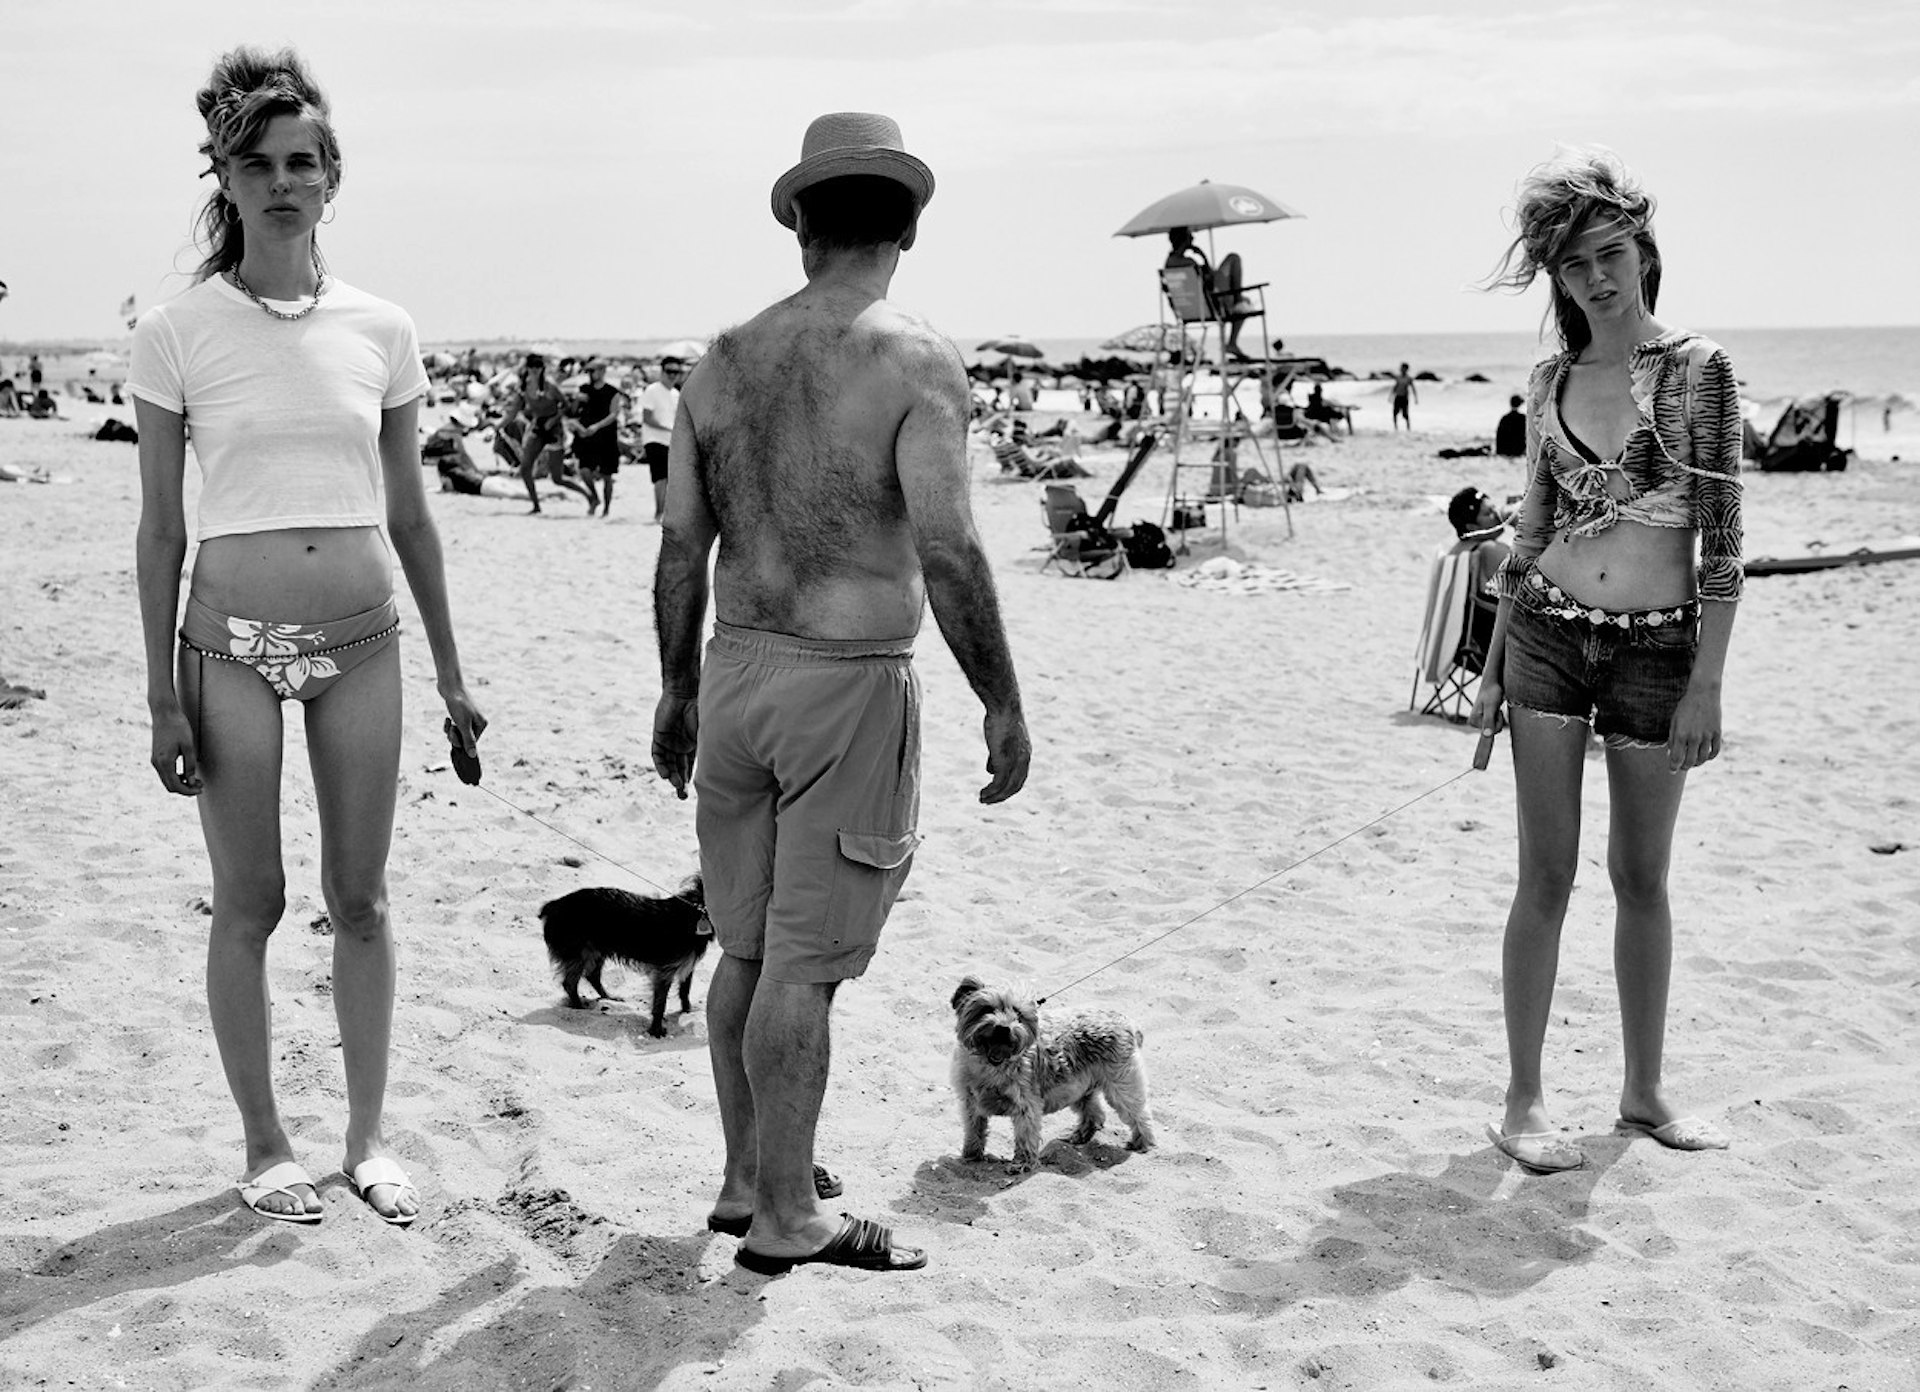 Celebrating the grime and glamour of NYC’s beaches